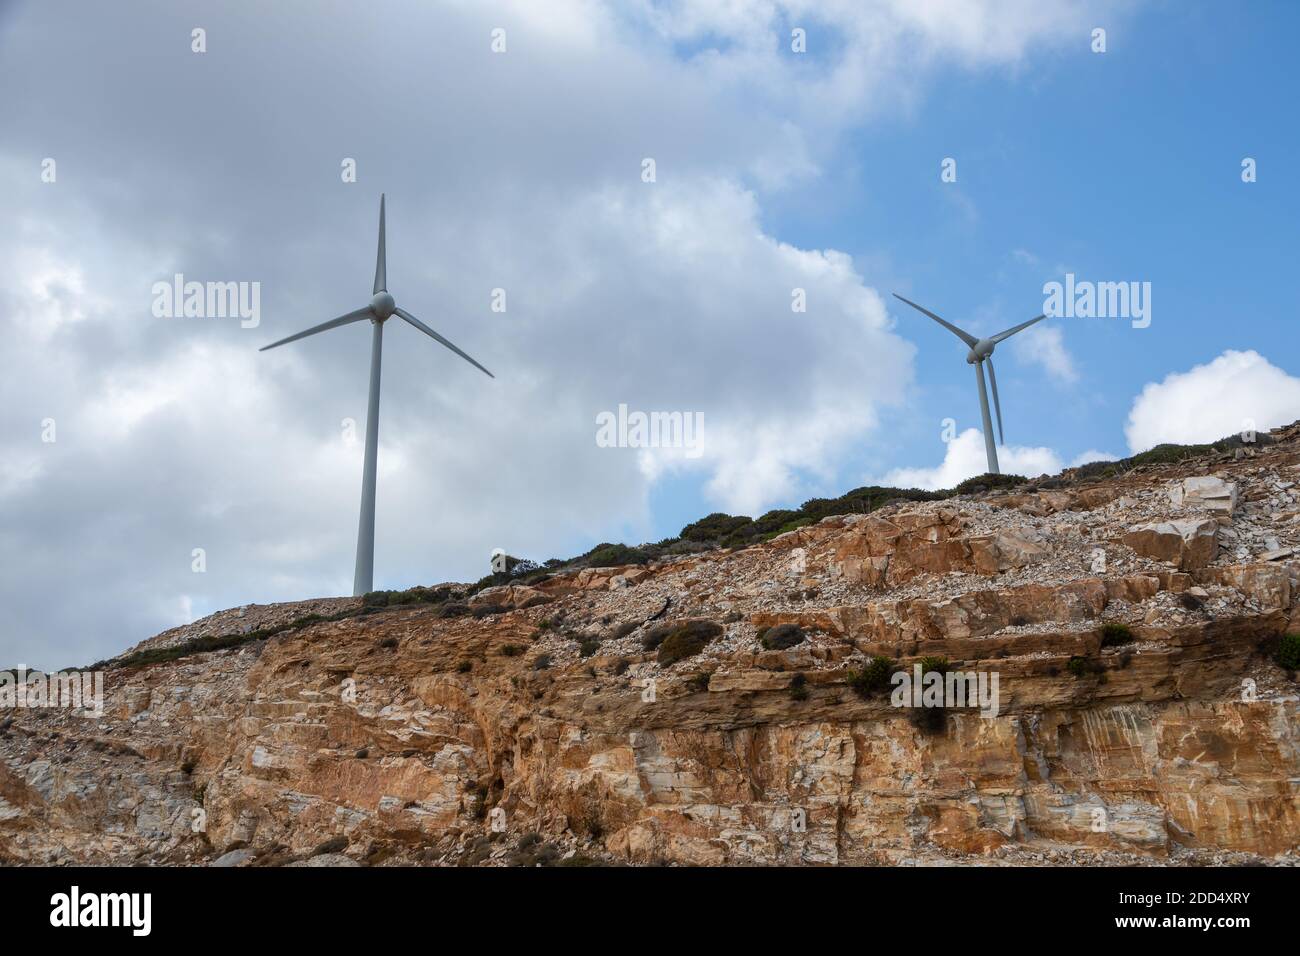 Green Energy, Windmills for electric power production in northern Ios Island, Greece. Stock Photo